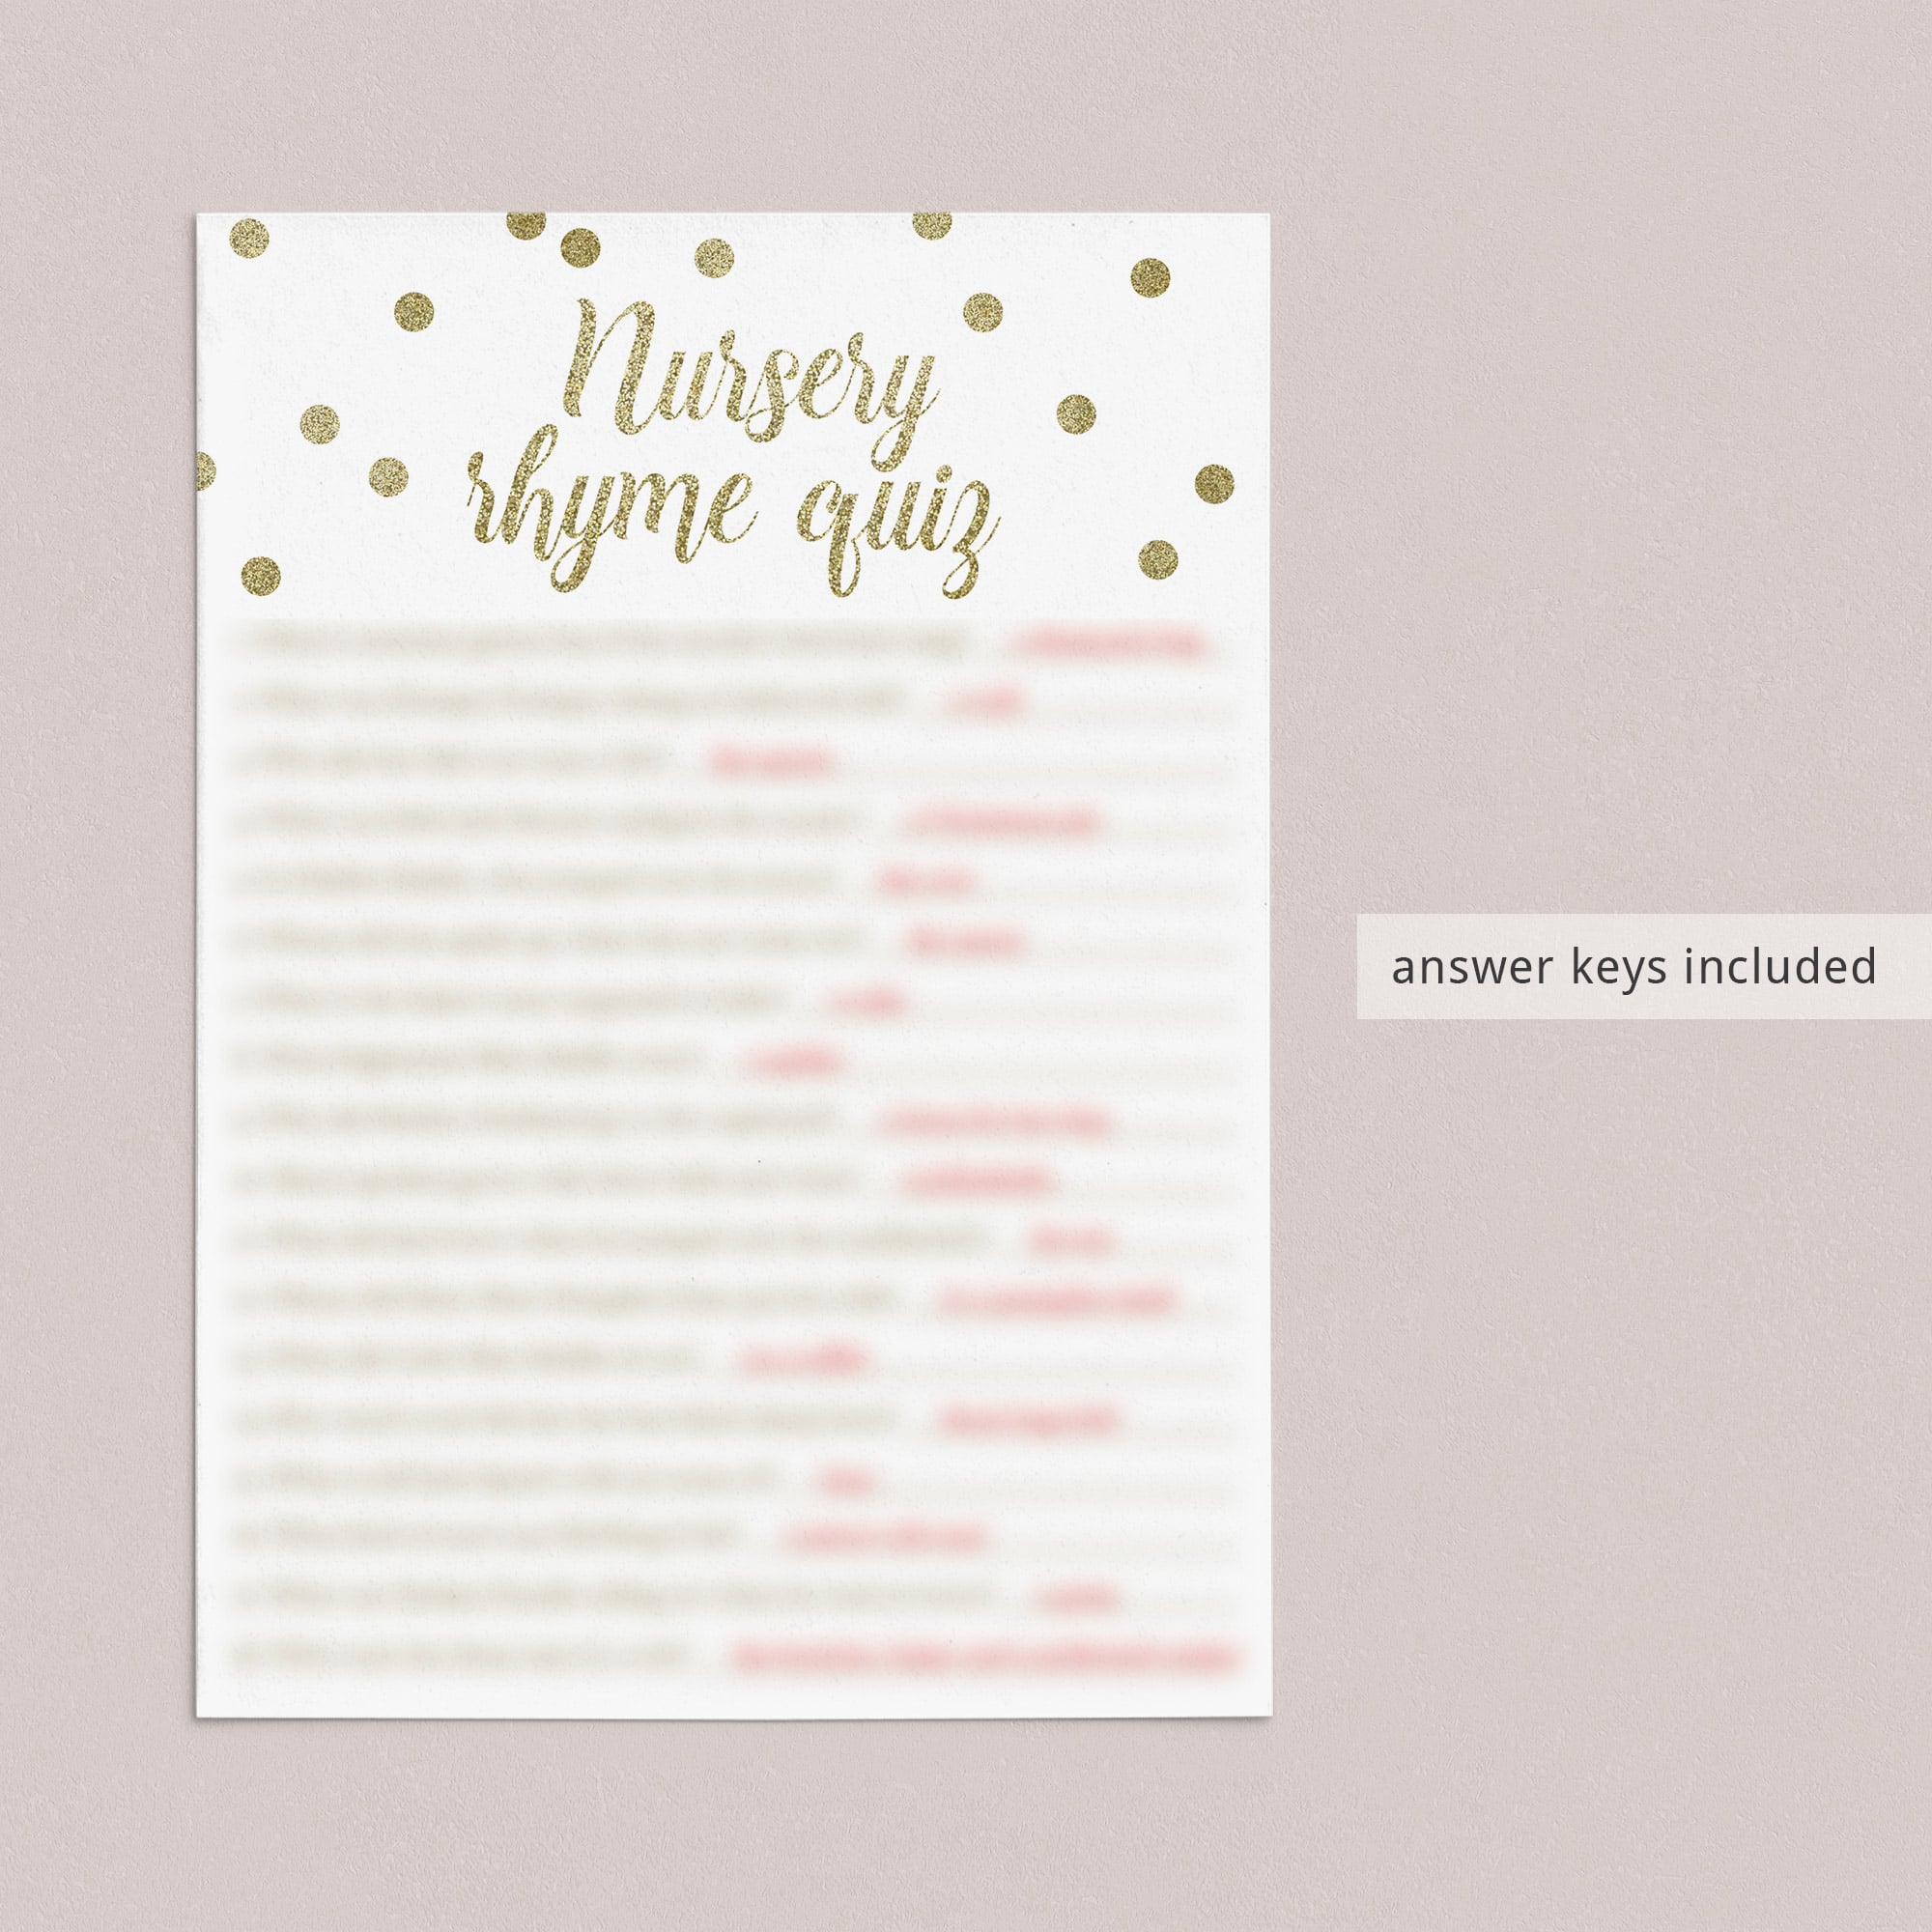 Nursery rhyme answers for baby shower by LittleSizzle